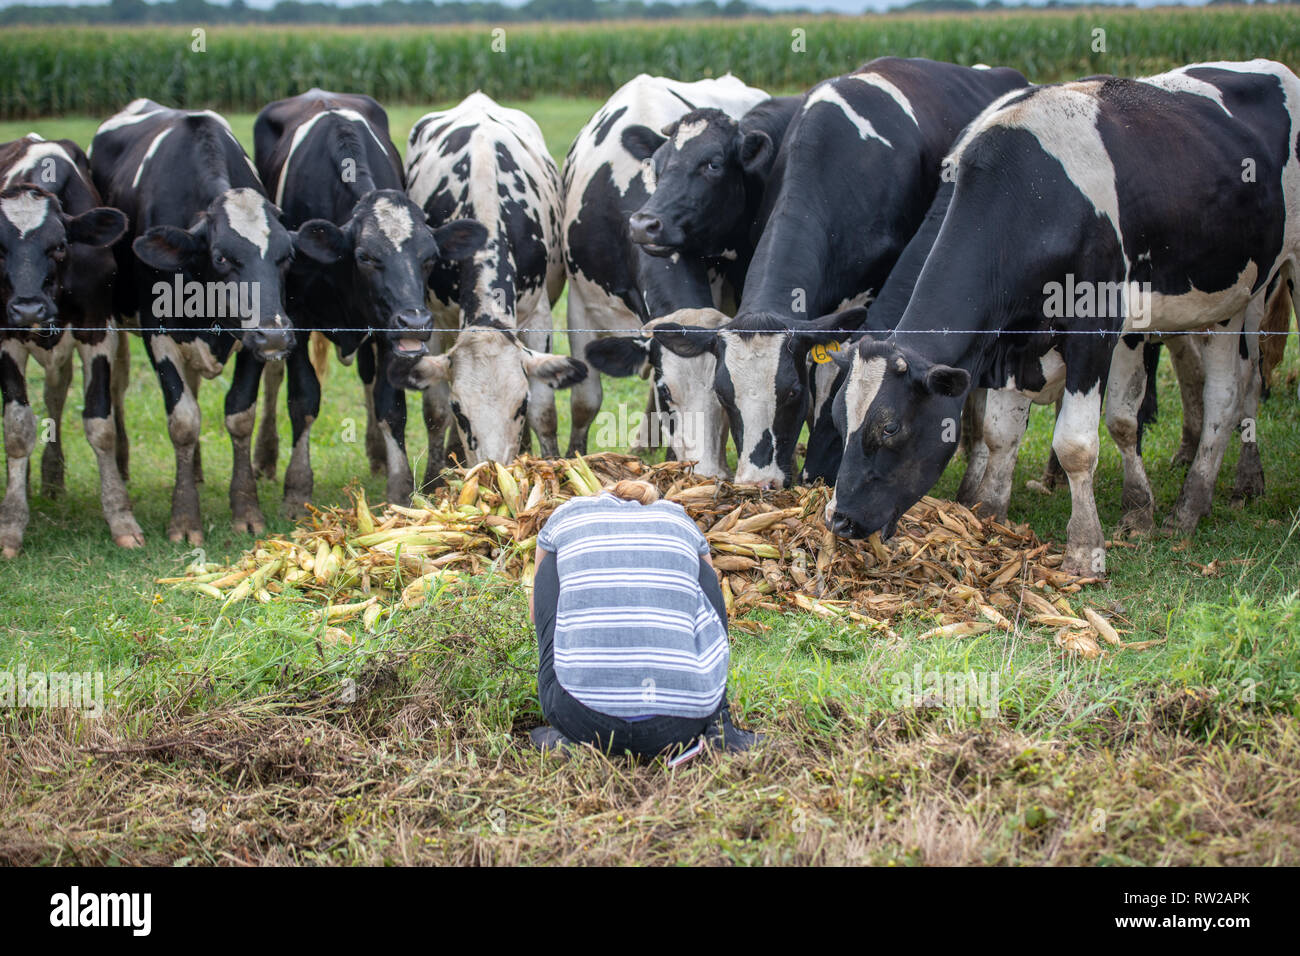 Young woman crouches down in front of holstein cattle eating corn still in the husks, Pokomoke, Maryland Stock Photo